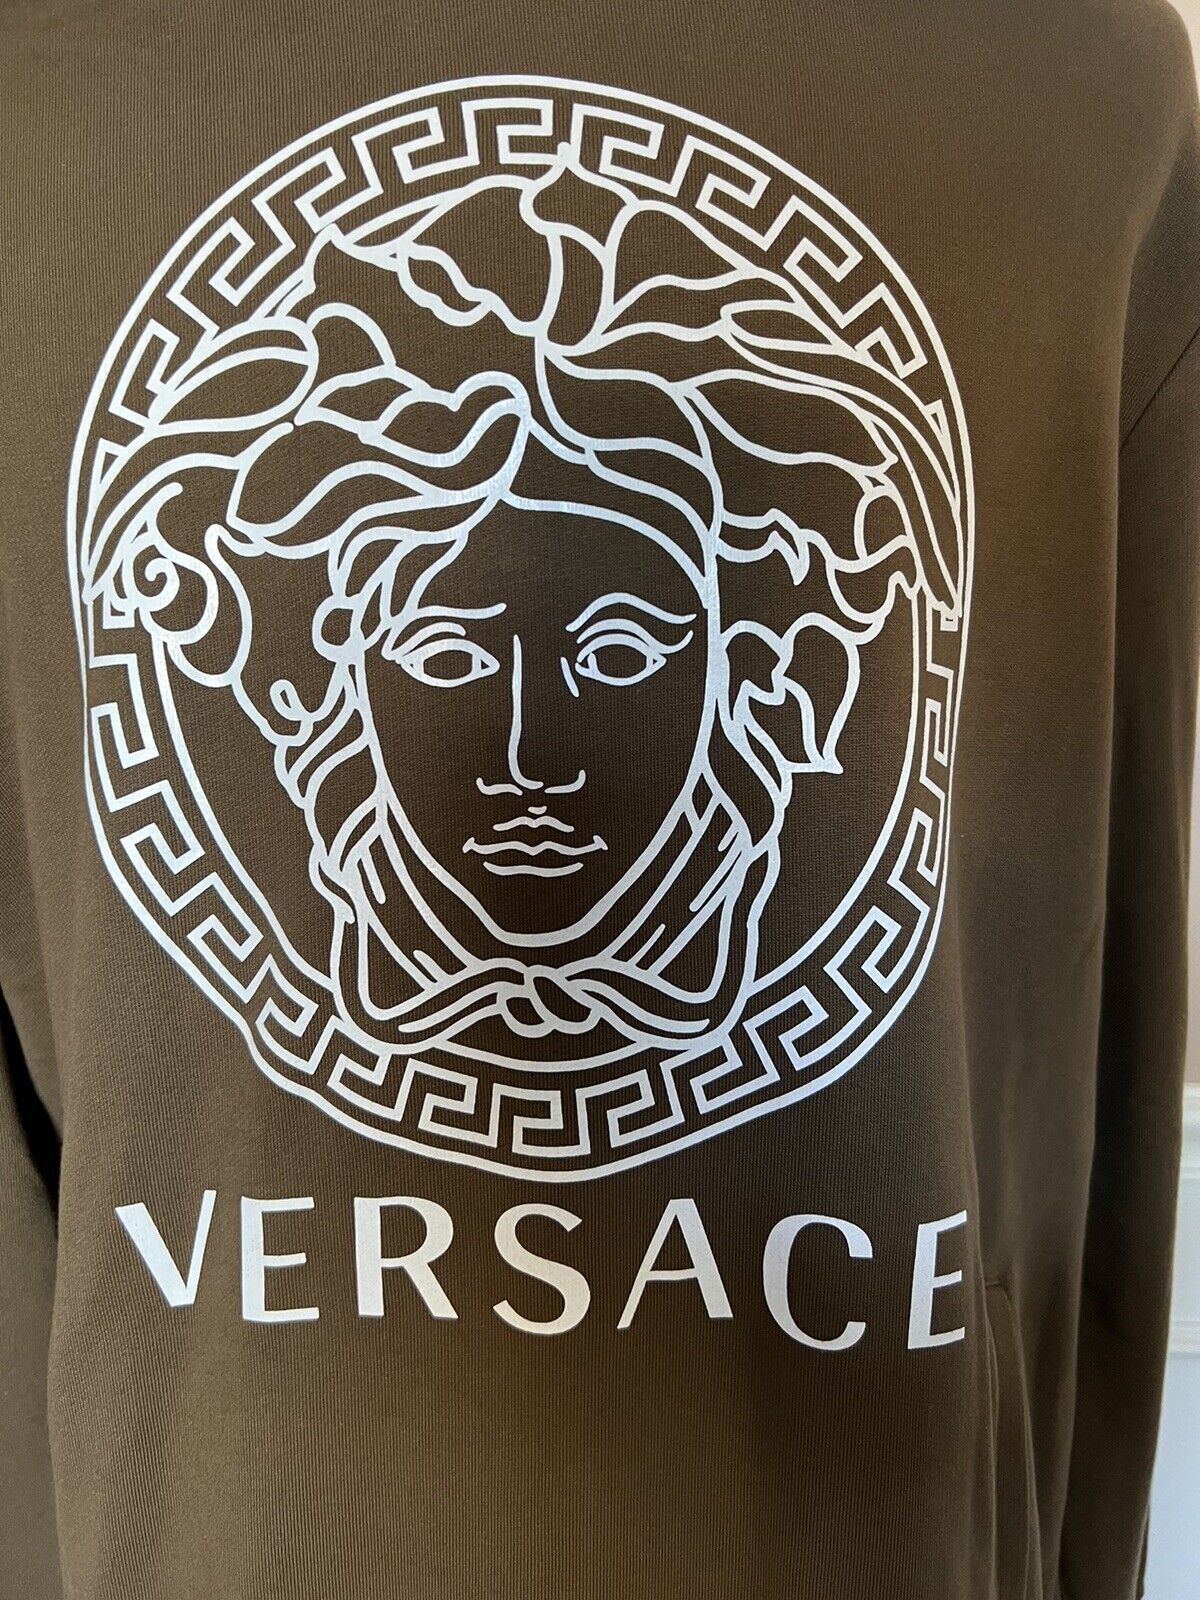 NWT $750 Versace Medusa Print Olive Cotton Sweatshirt with Hoodie 4XL A89514S IT